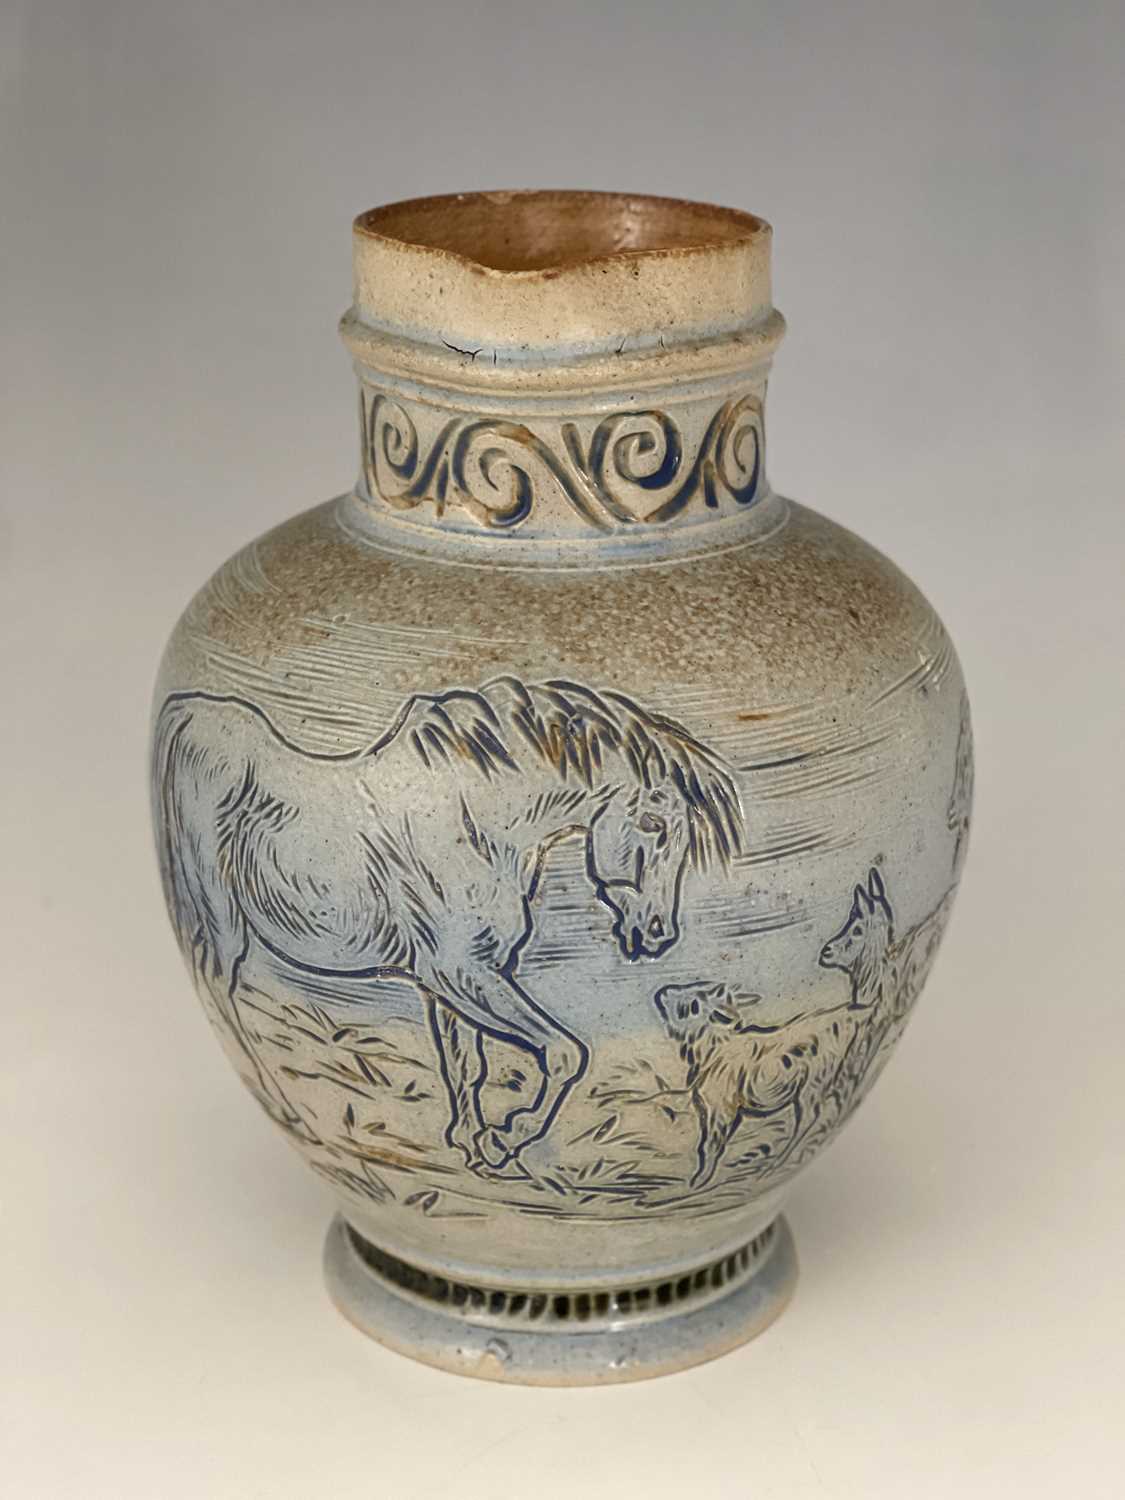 Hannah Barlow for Doulton Lambeth, a stoneware jug, 1874, shouldered ovoid form, sgraffito decorated - Image 2 of 9